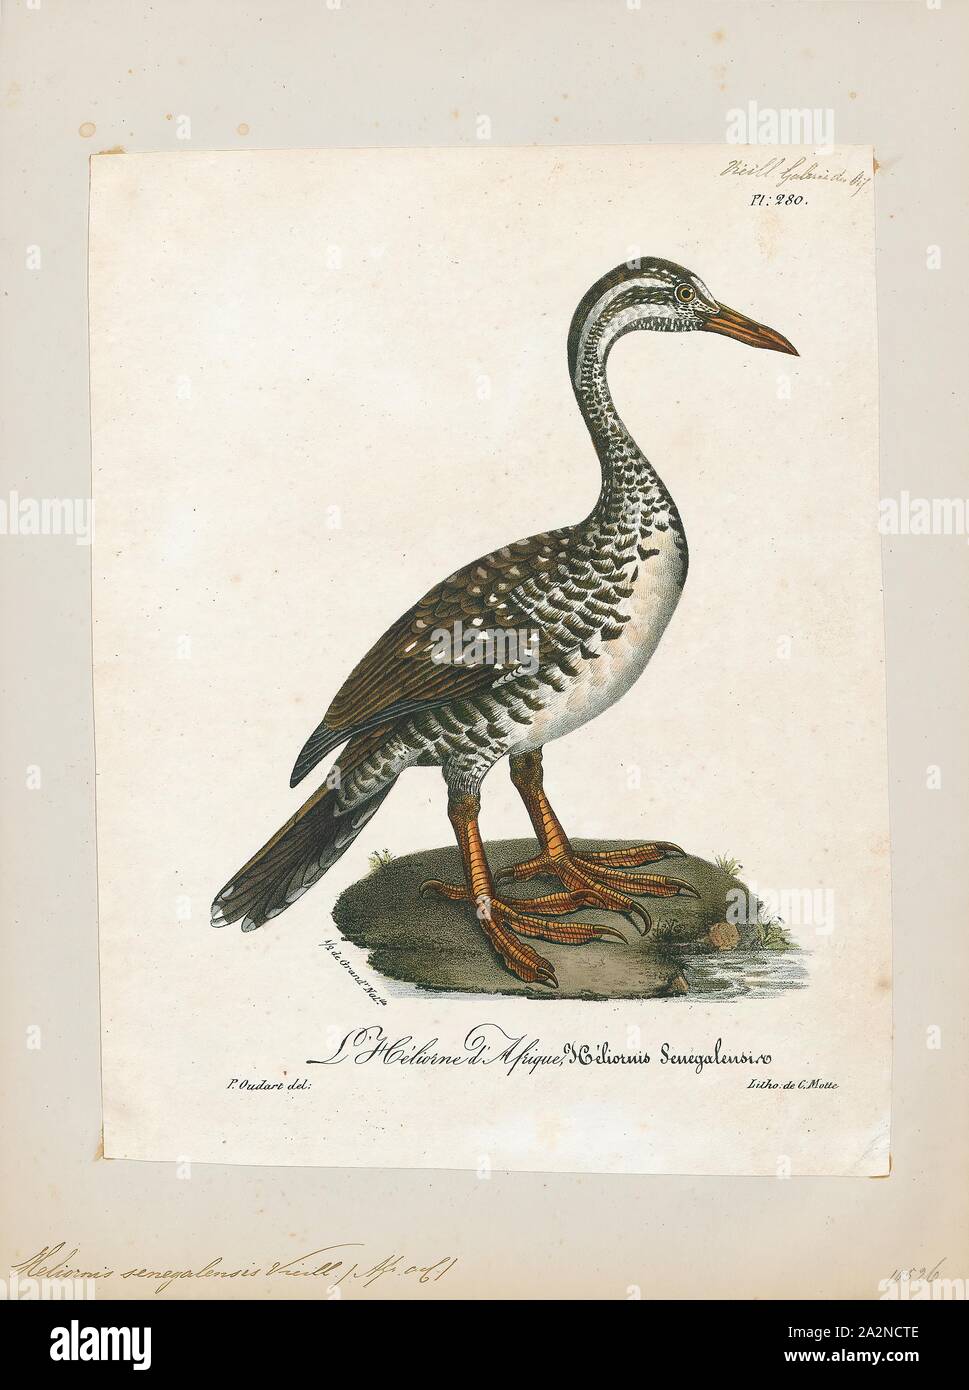 Podica senegalensis, Print, The African finfoot (Podica senegalensis) is an aquatic bird from the family Heliornithidae (the finfoots and sungrebe). The species lives in the rivers and lakes of western, central, and southern Africa., 1825-1834 Stock Photo